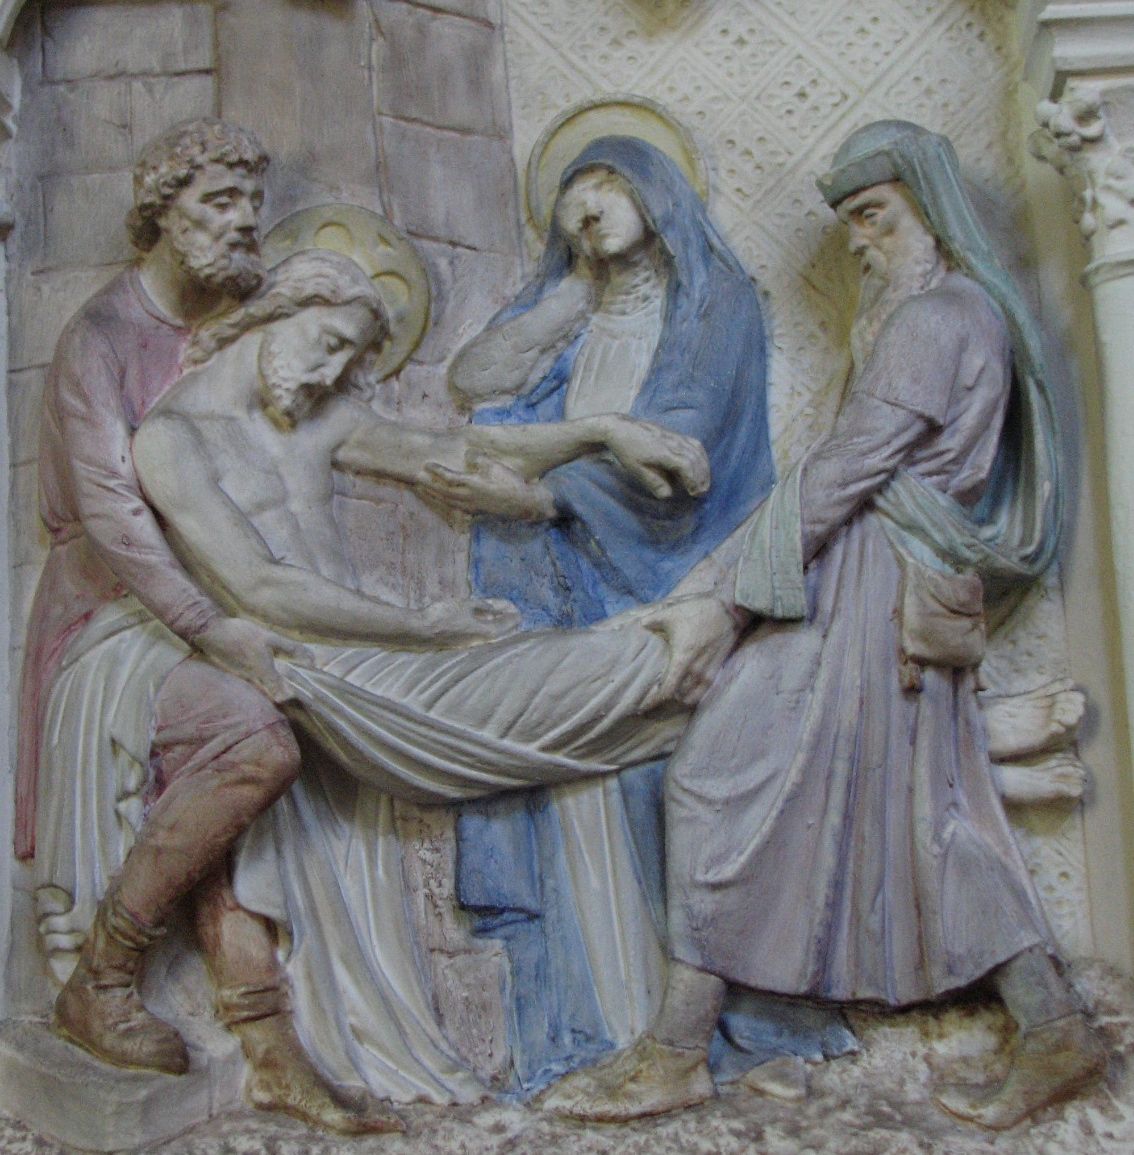 this is a sculpture in the wall of a church